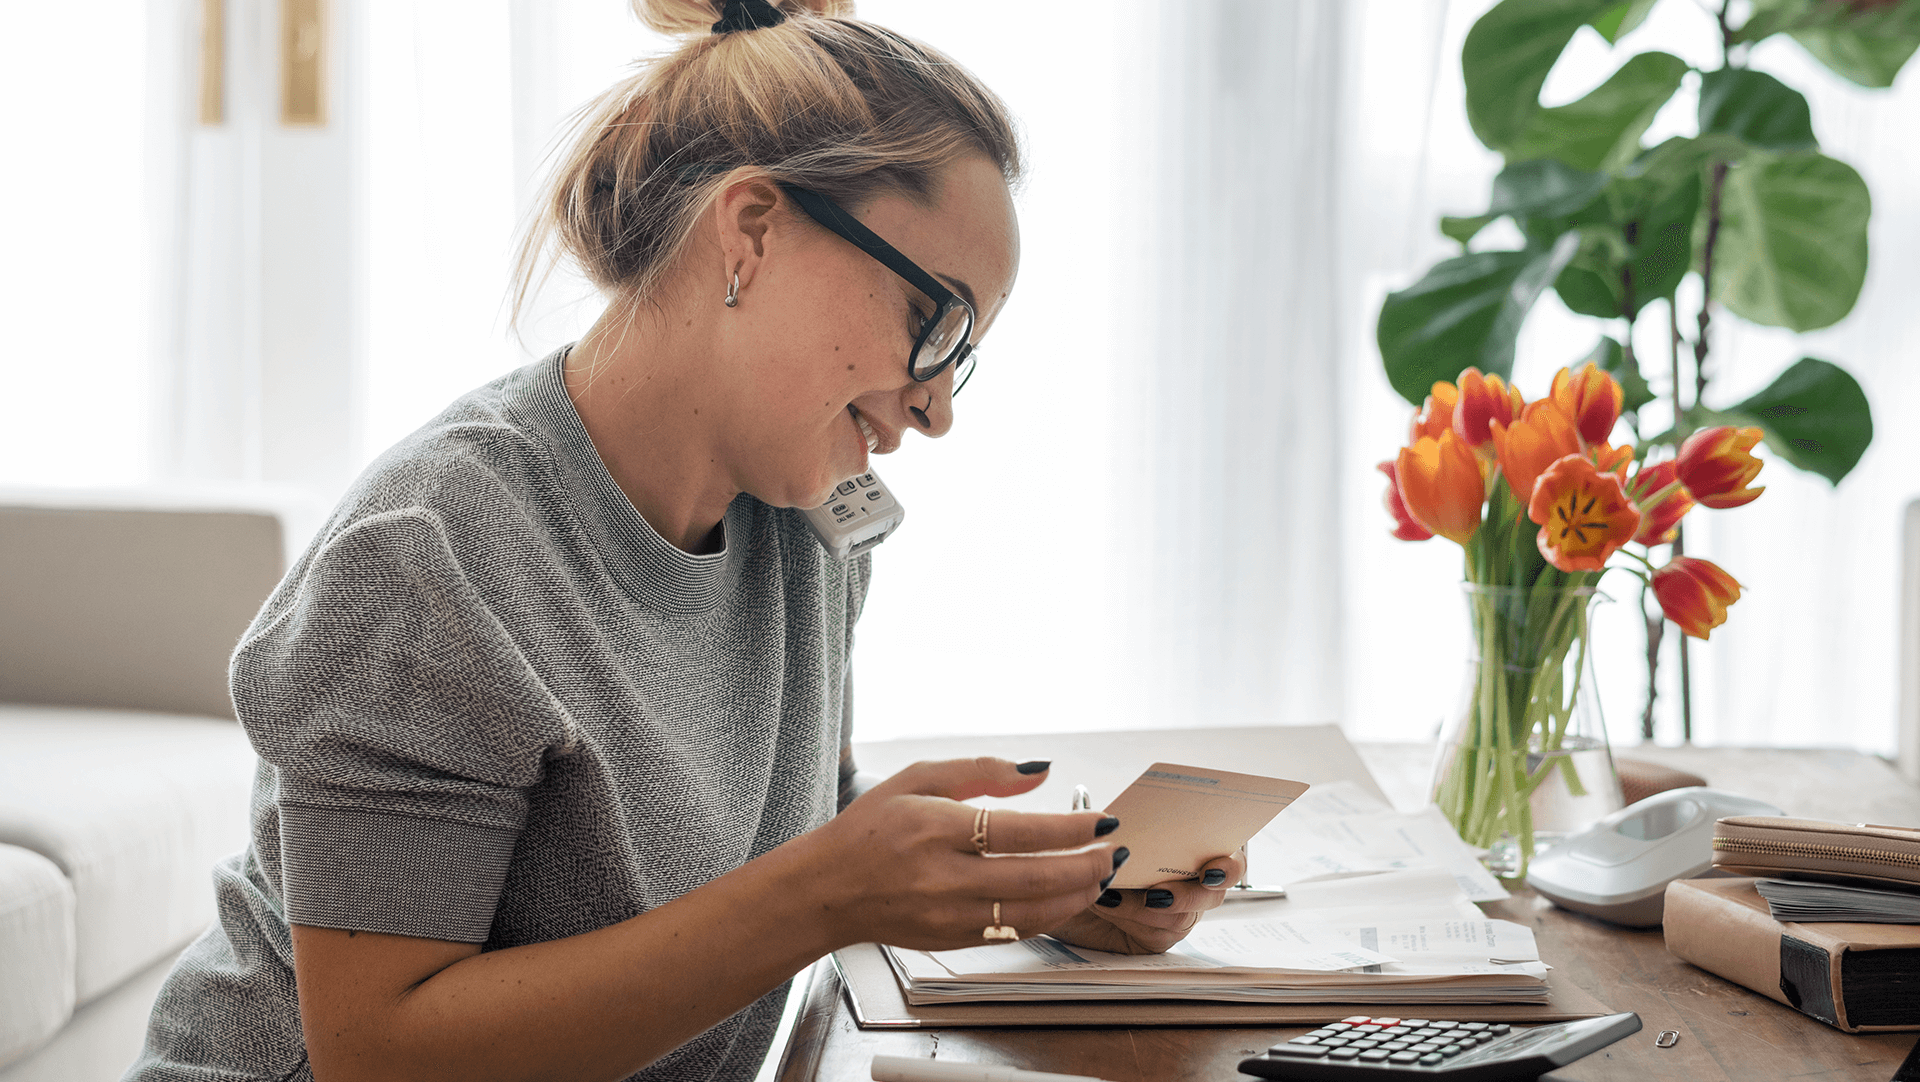 A focused individual multitasking at a home office, conversing on the phone while jotting down notes, with fresh flowers adding a touch of vibrancy to the workspace.